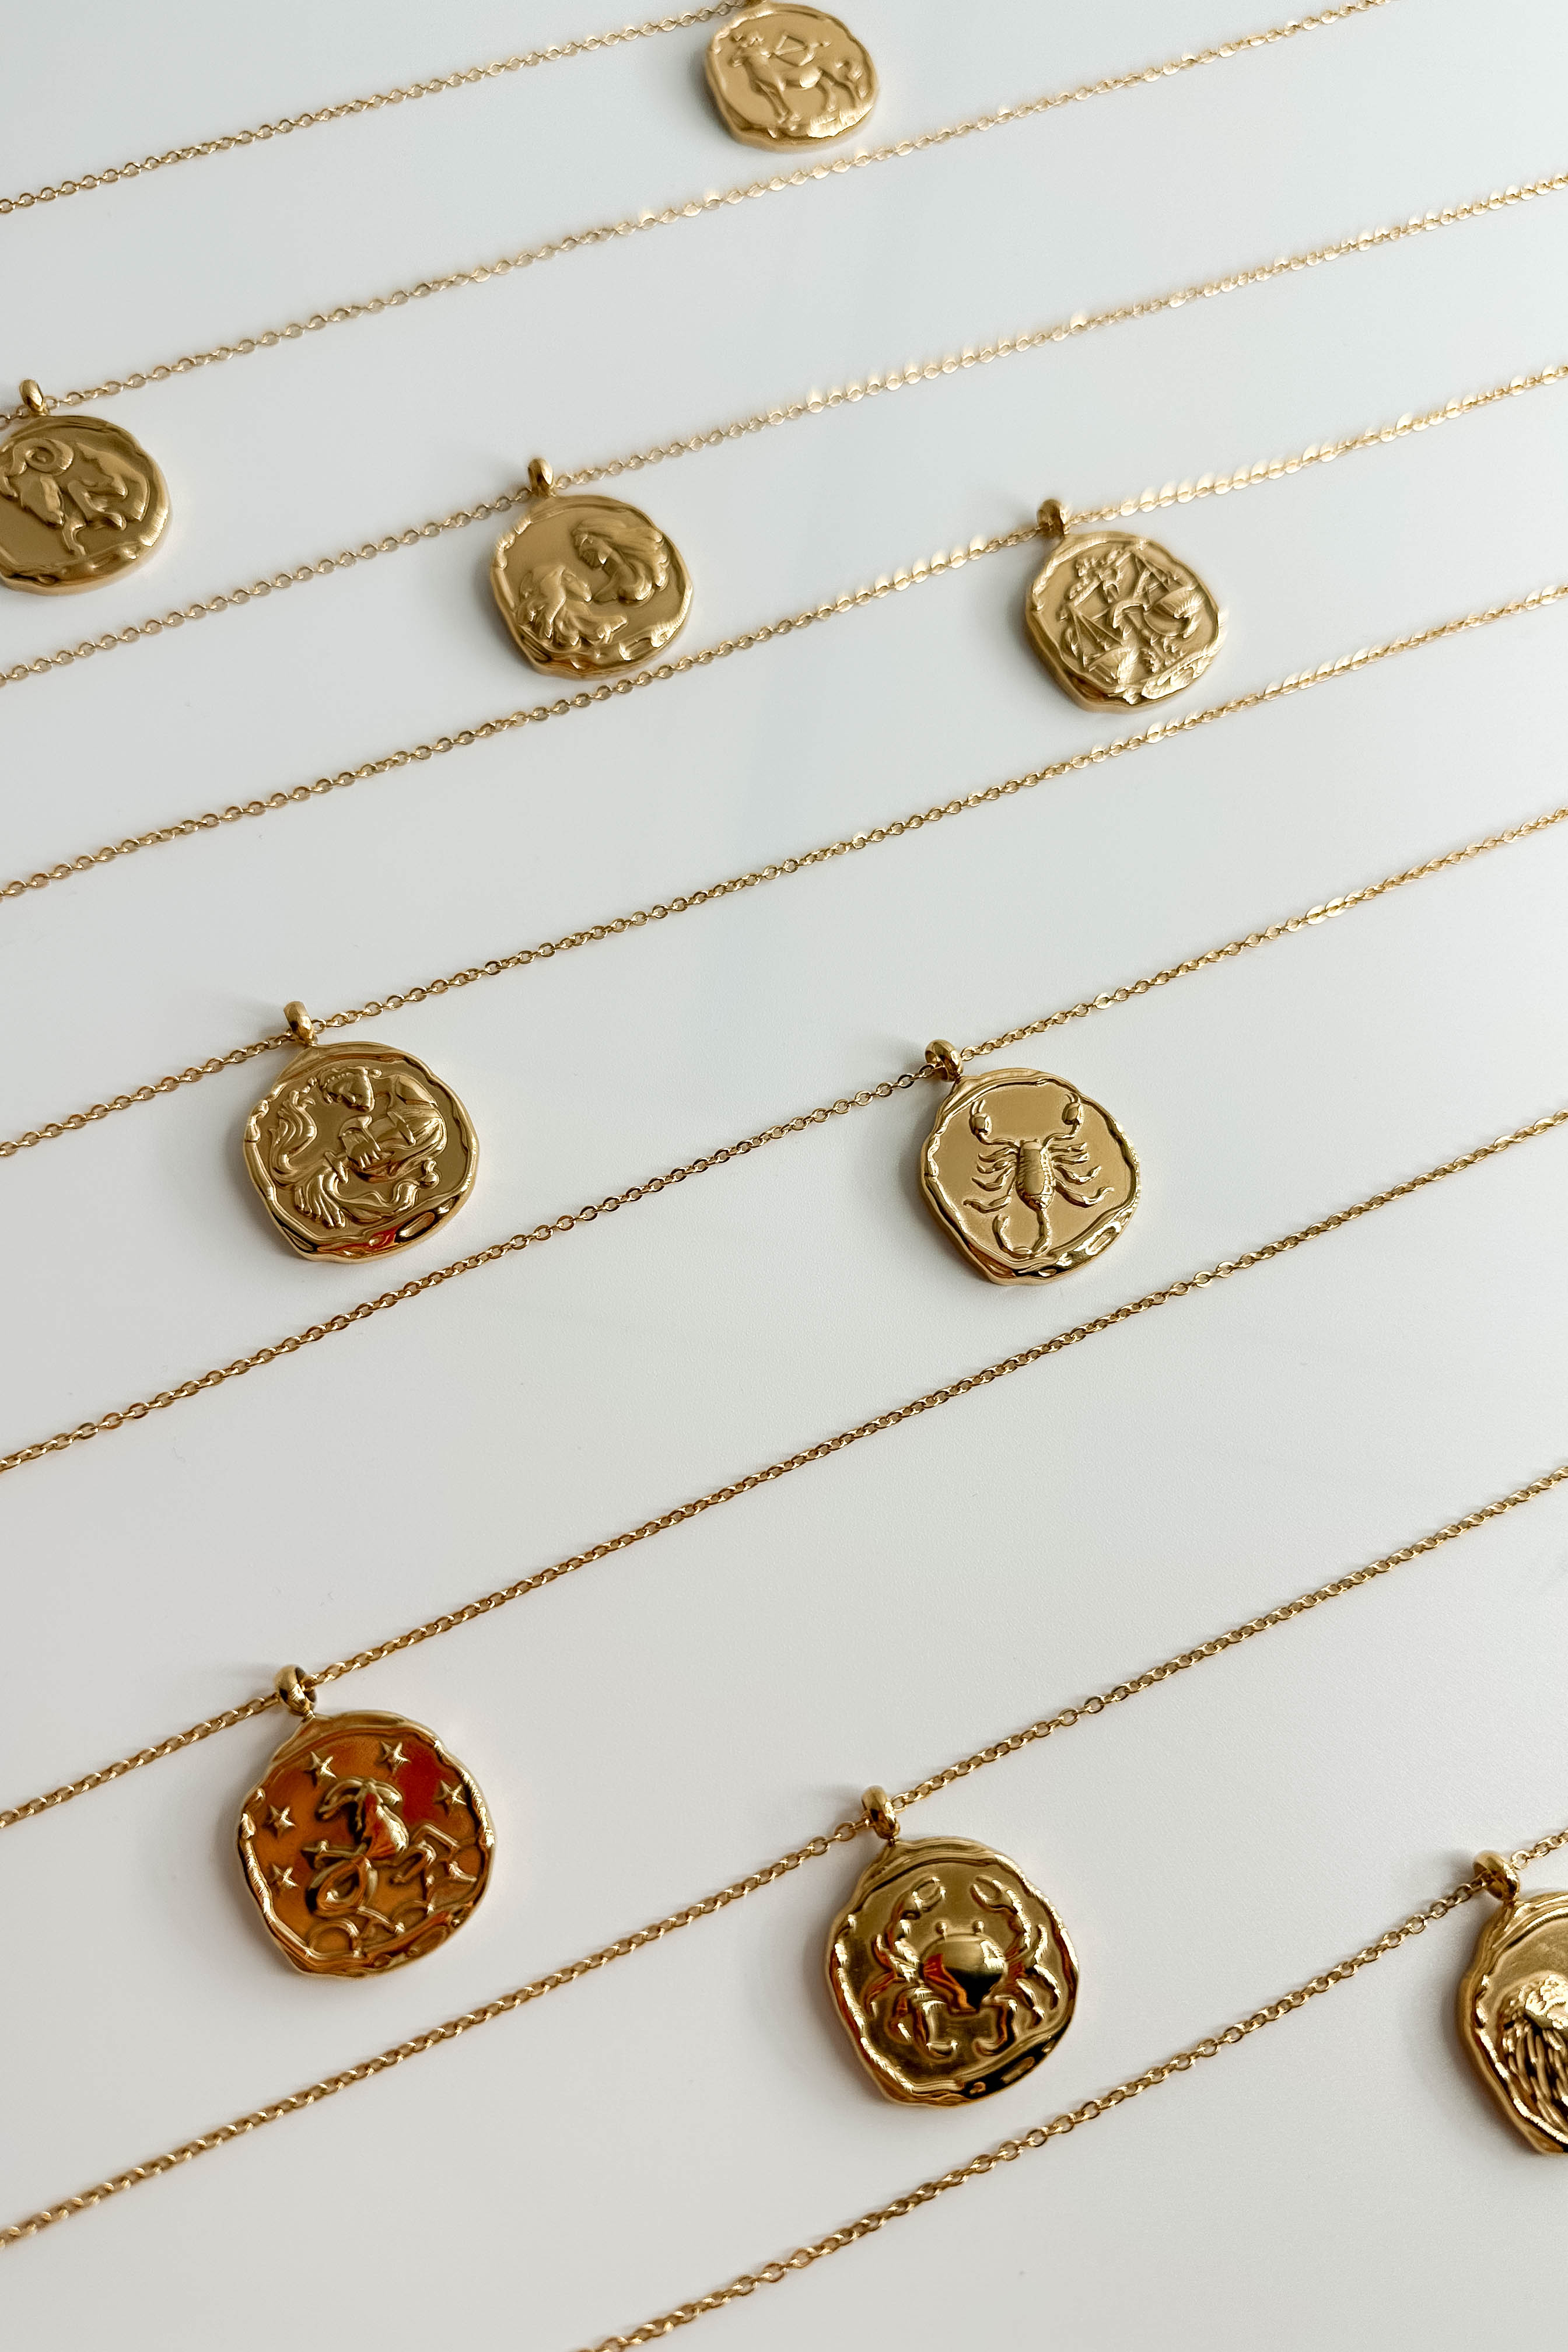 Image shows 9 of the Zodiac Gold Coin Necklaces lined up against a white background. 